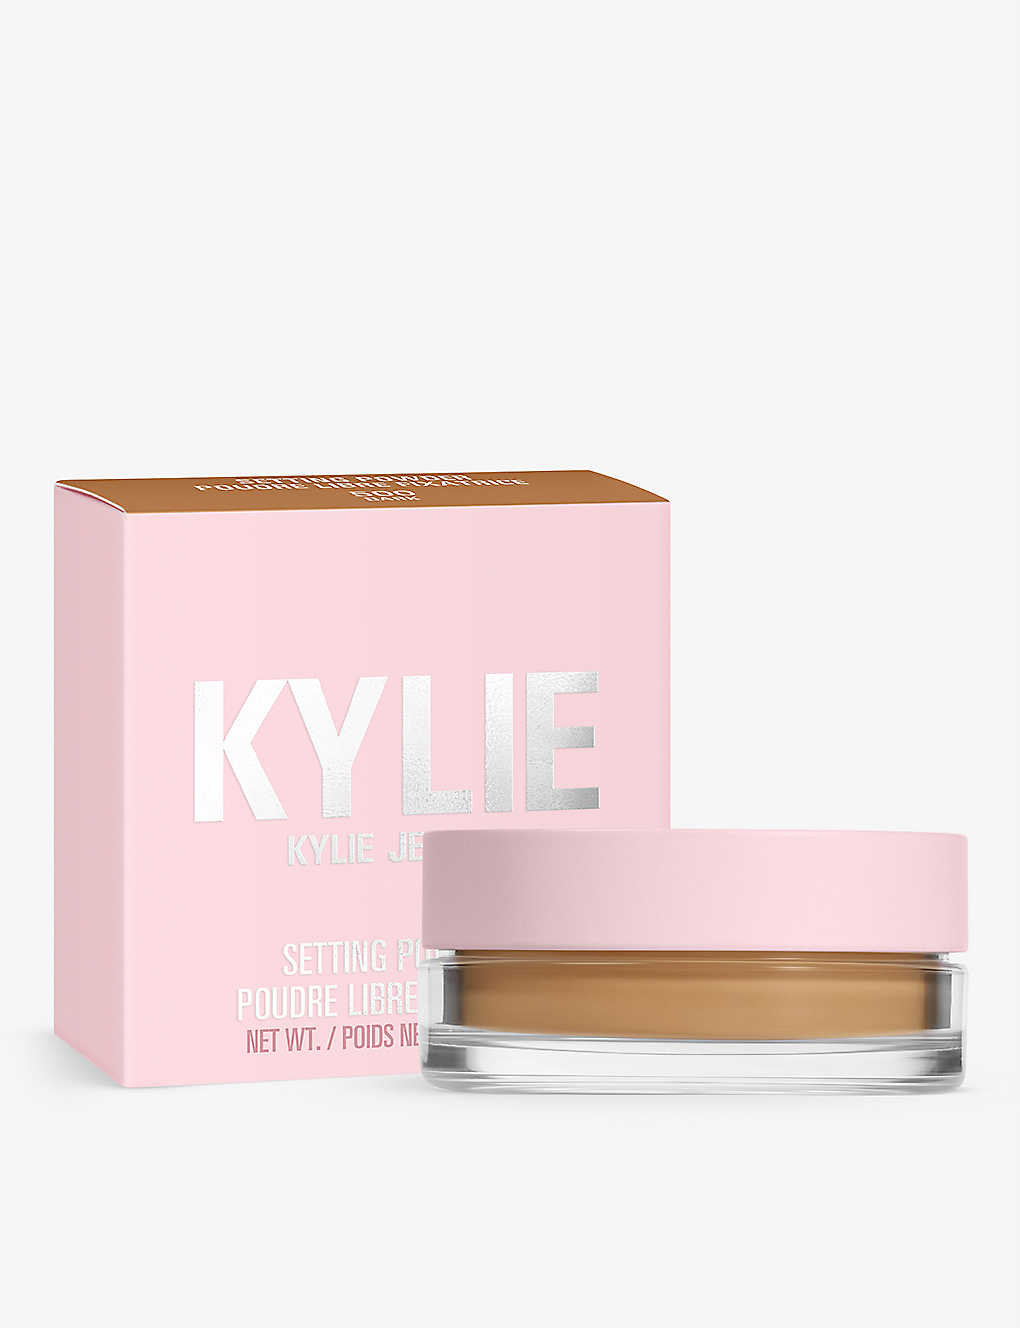 Kylie By Kylie Jenner Loose Setting Powder 5g In 500 Dark